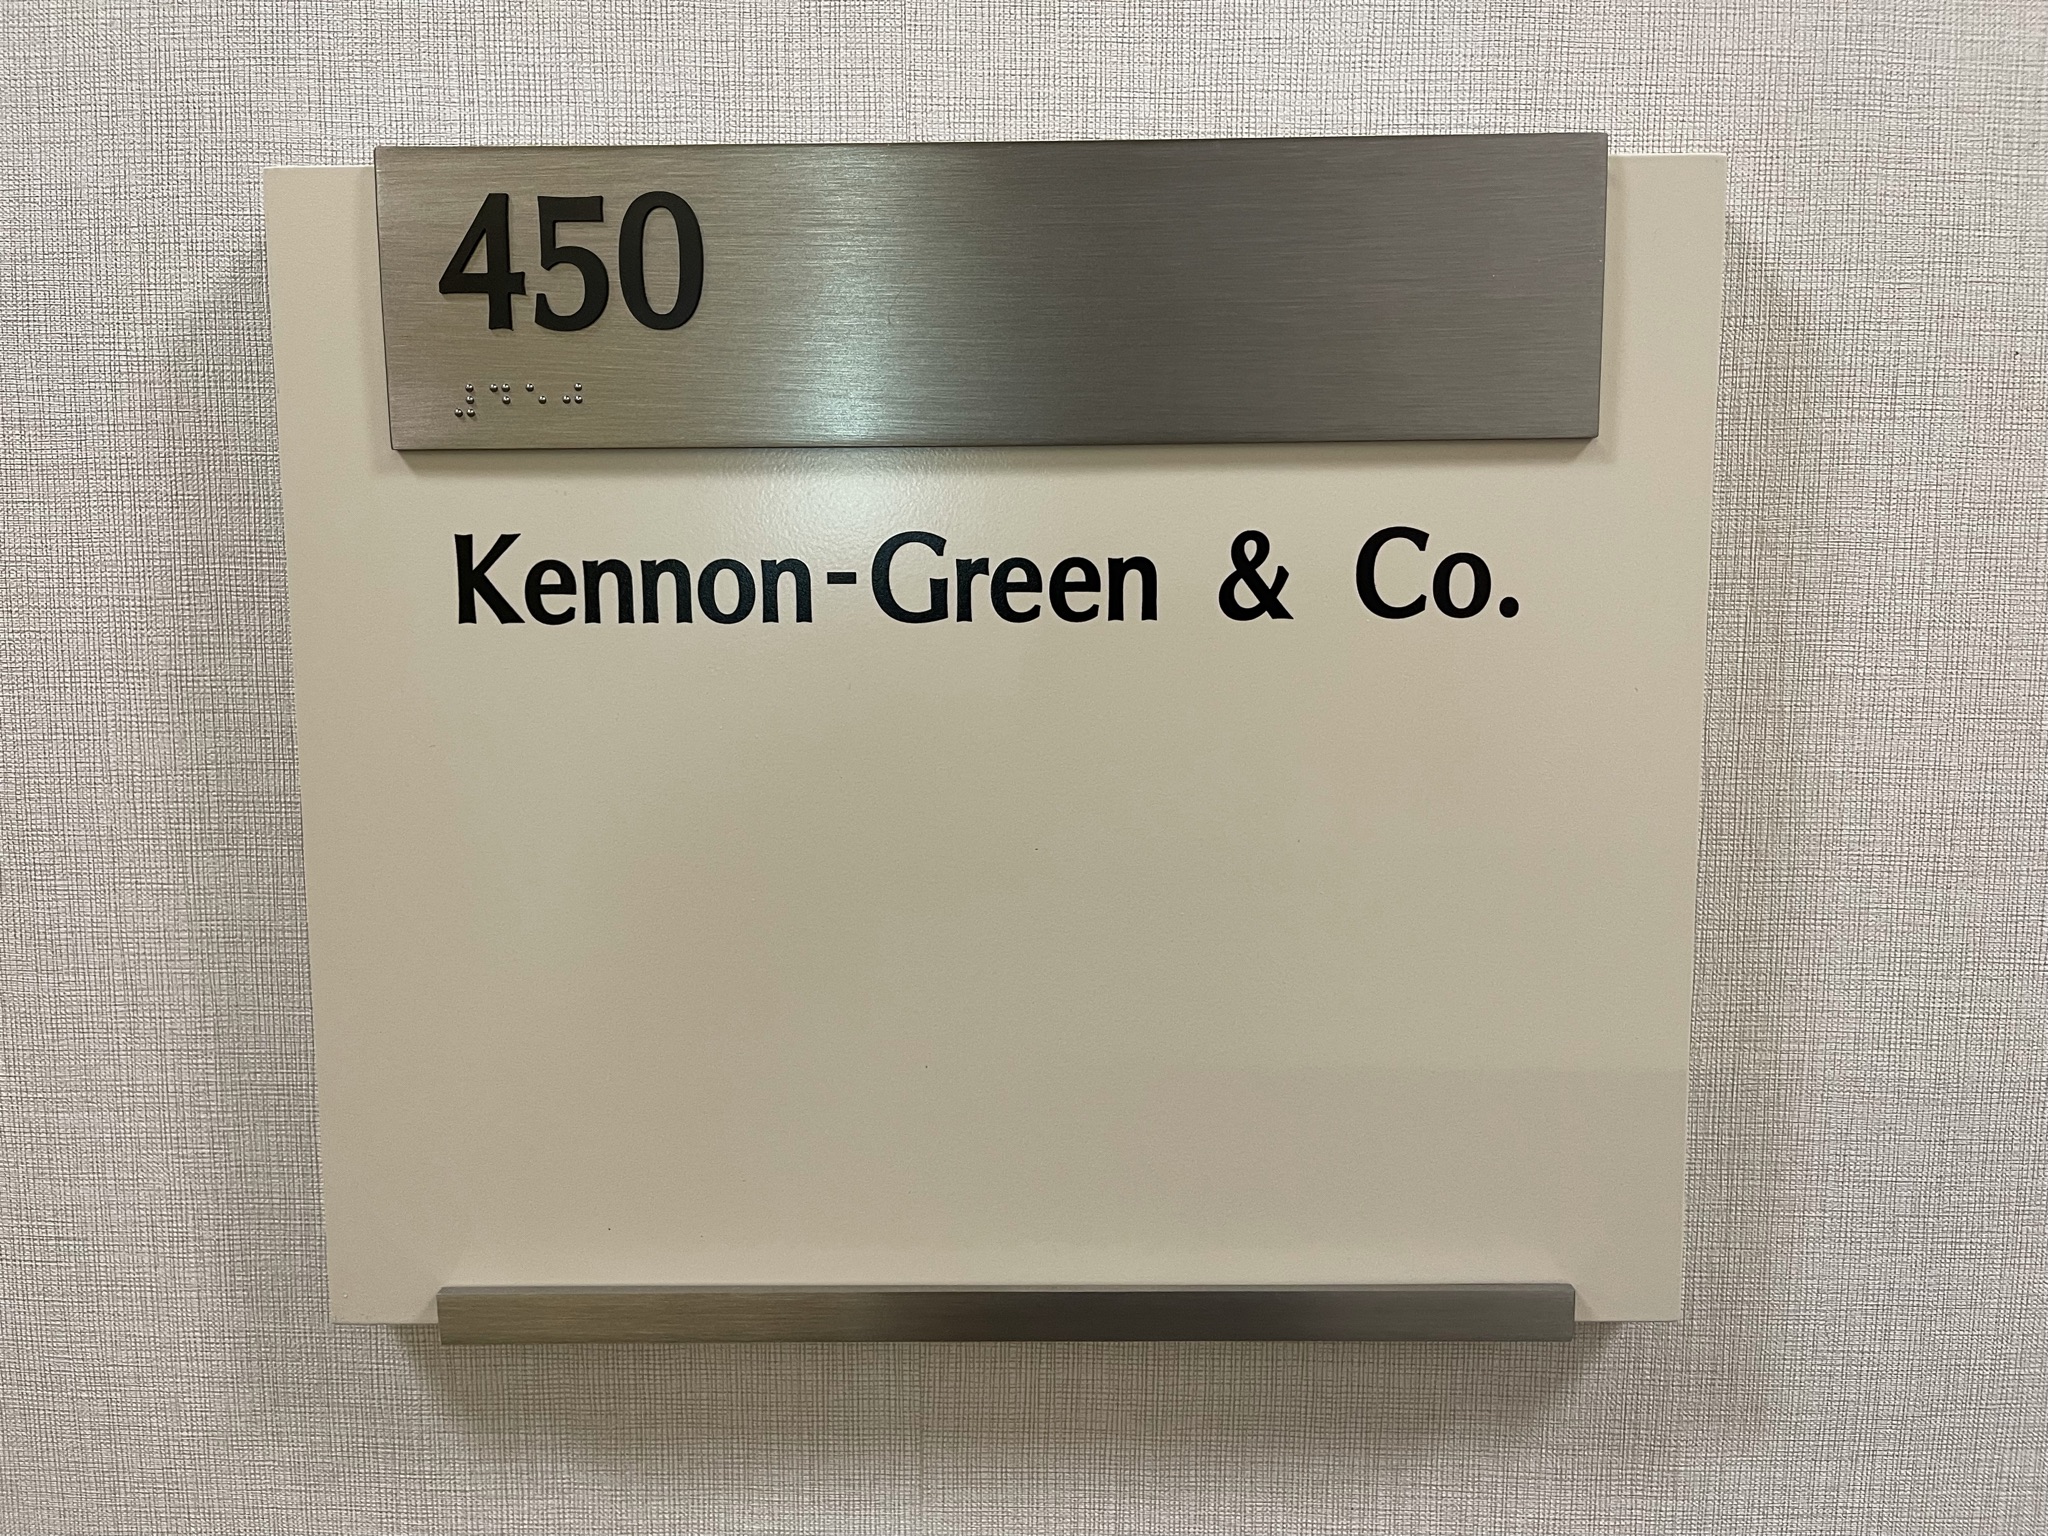 Official Nameplate of Kennon-Green & Co at 520 Newport Center Drive